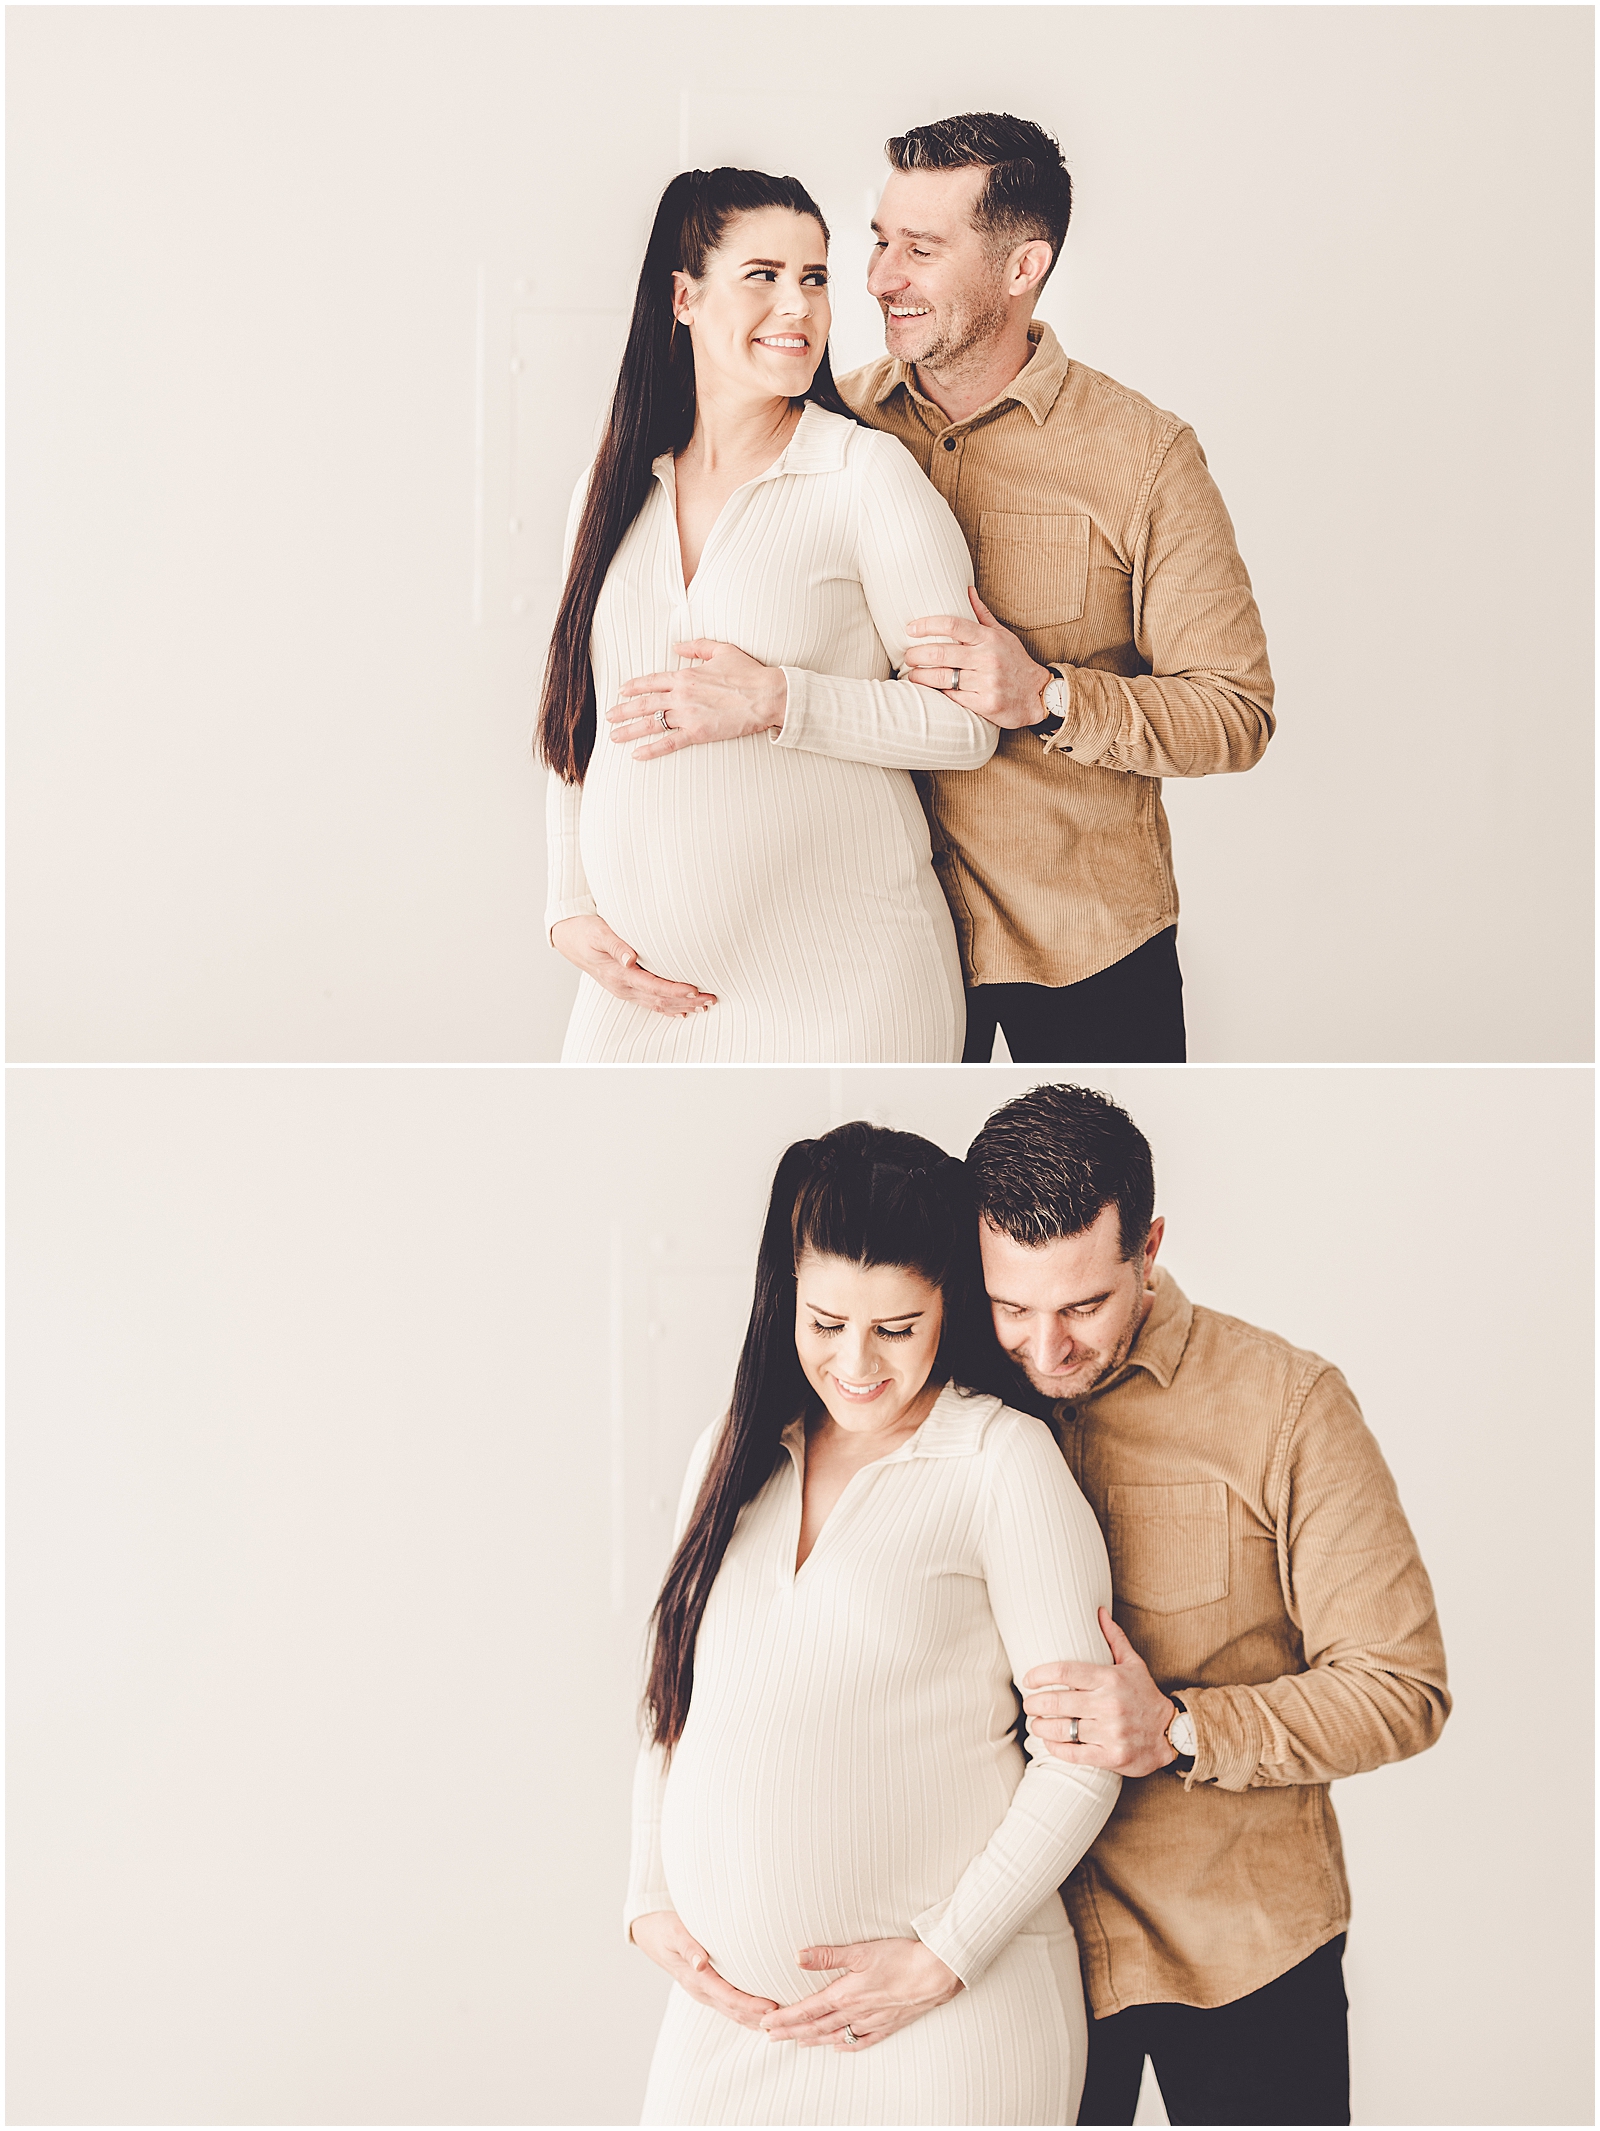 Family maternity photography session with the Benoit family at Kara Evans Photographer - Natural Light Studio Photographer in Kankakee, IL.